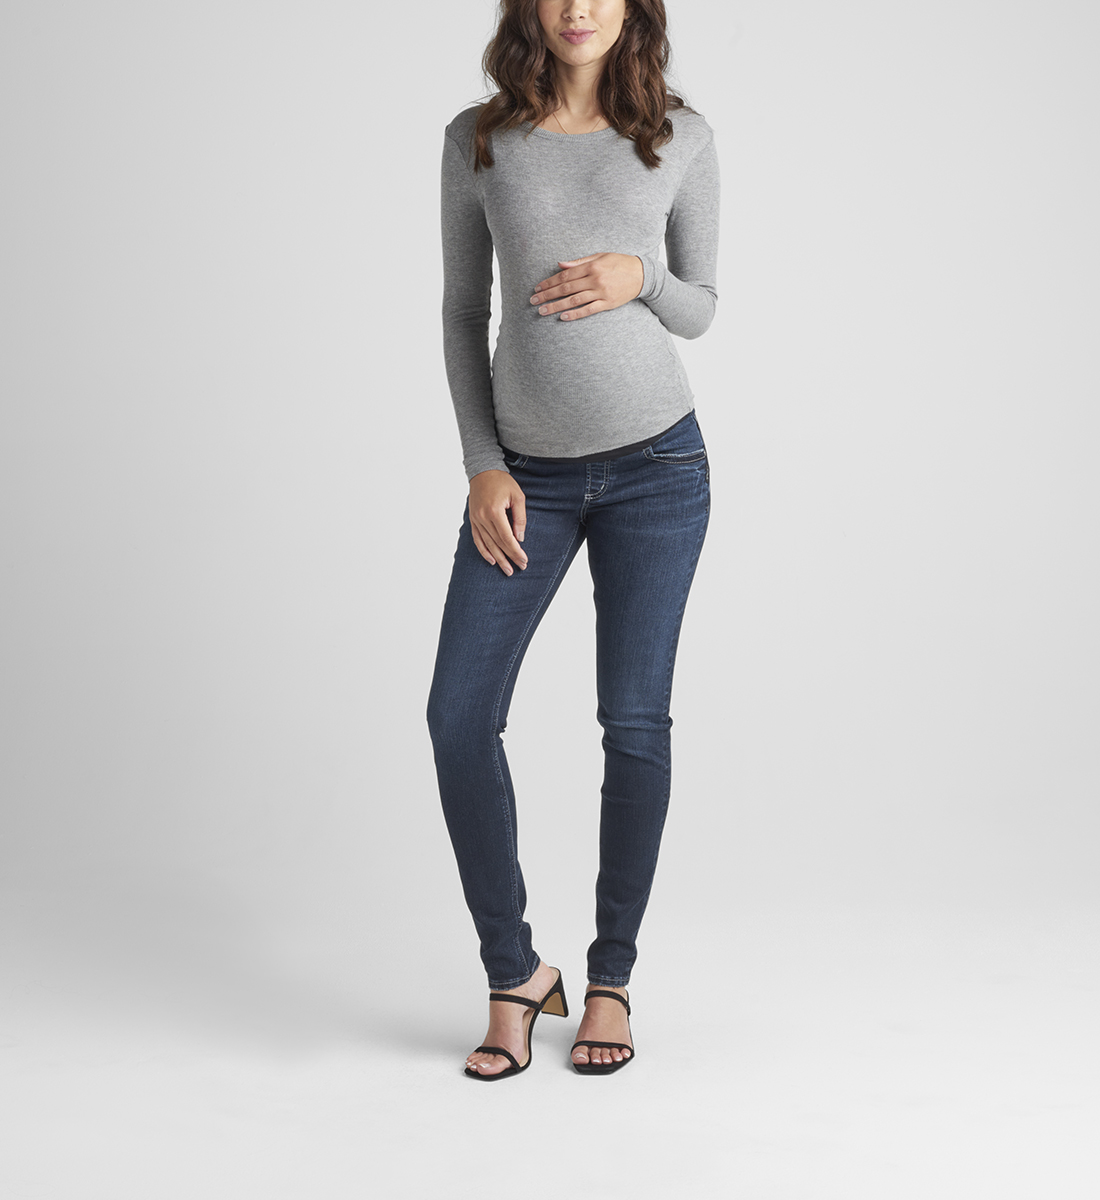 Silver Jeans Suki Mid Rise Skinny Maternity Jeans